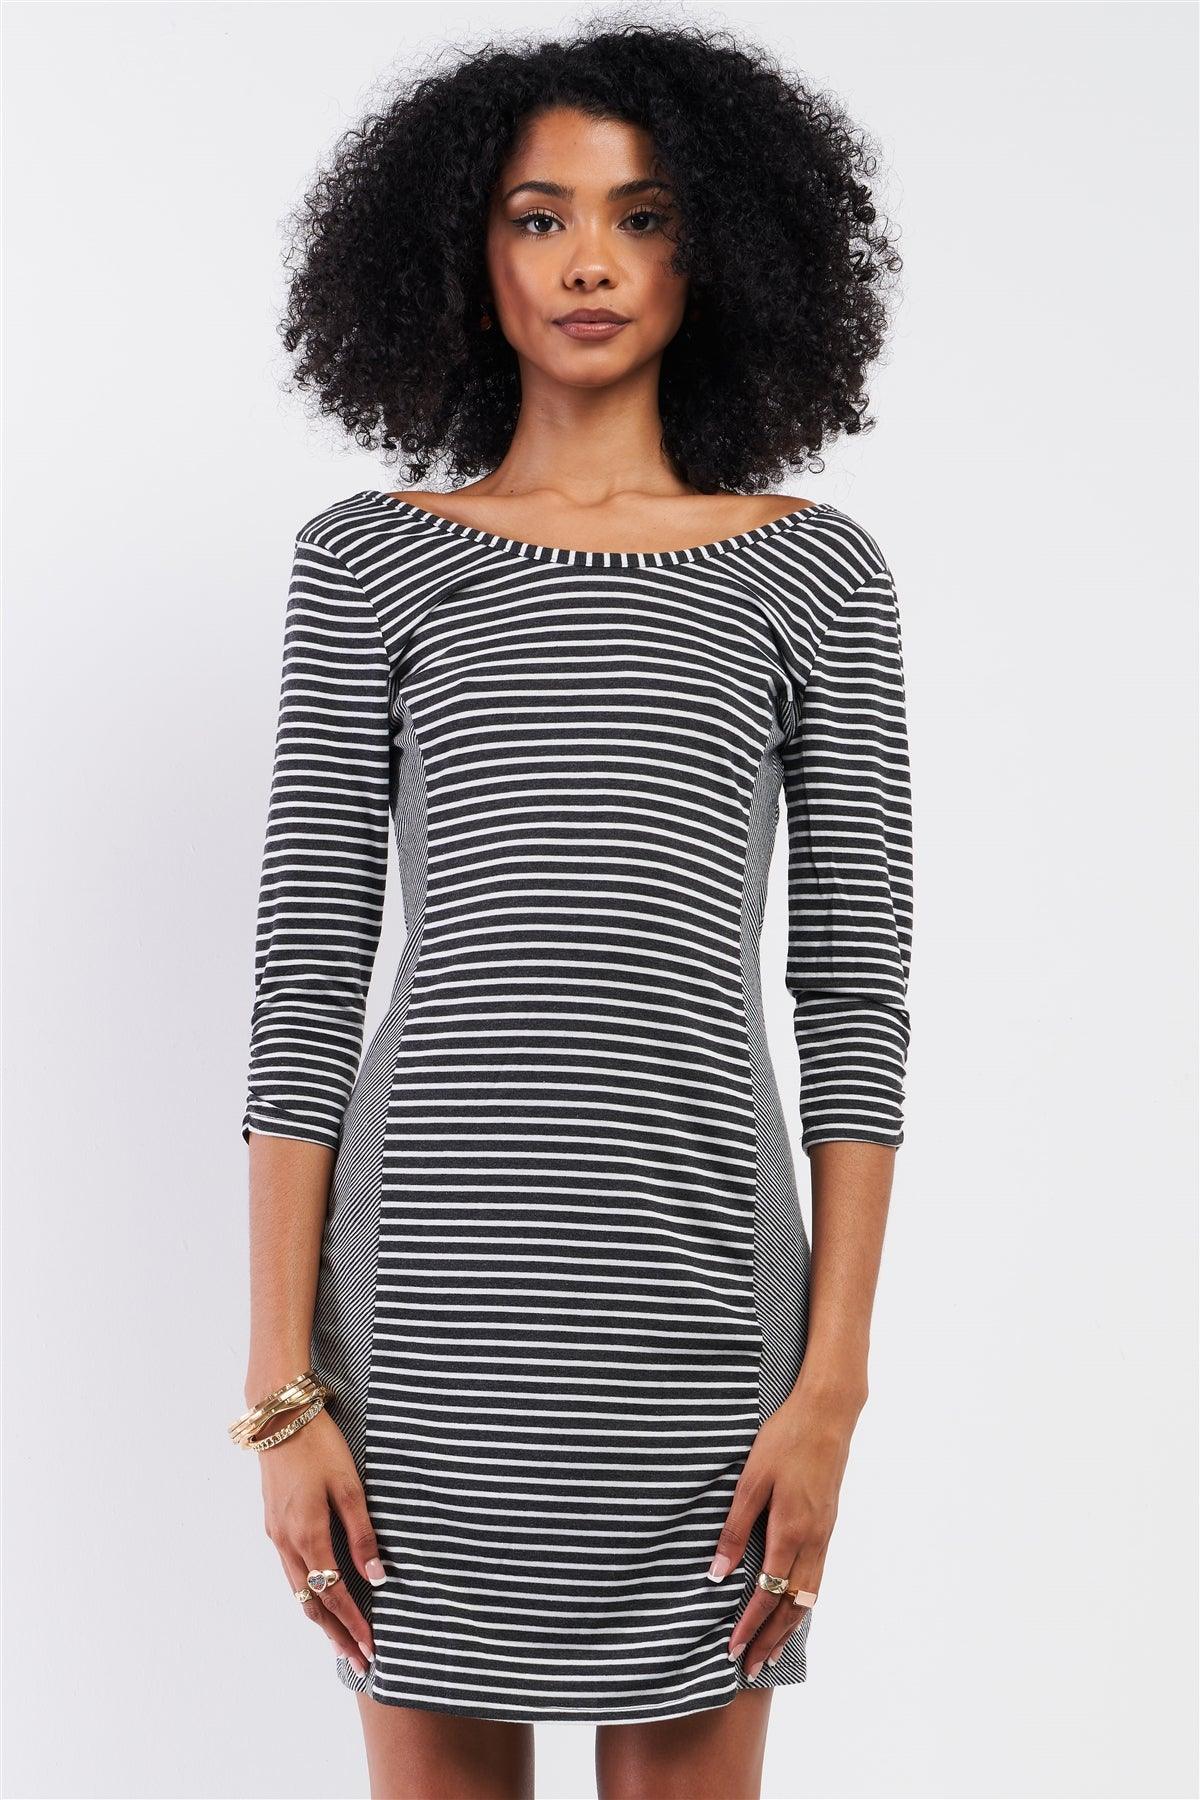 Heather Grey Multi-Striped Boat Neck 3/4 Sleeve Fitted Mini Dress /2-2-2